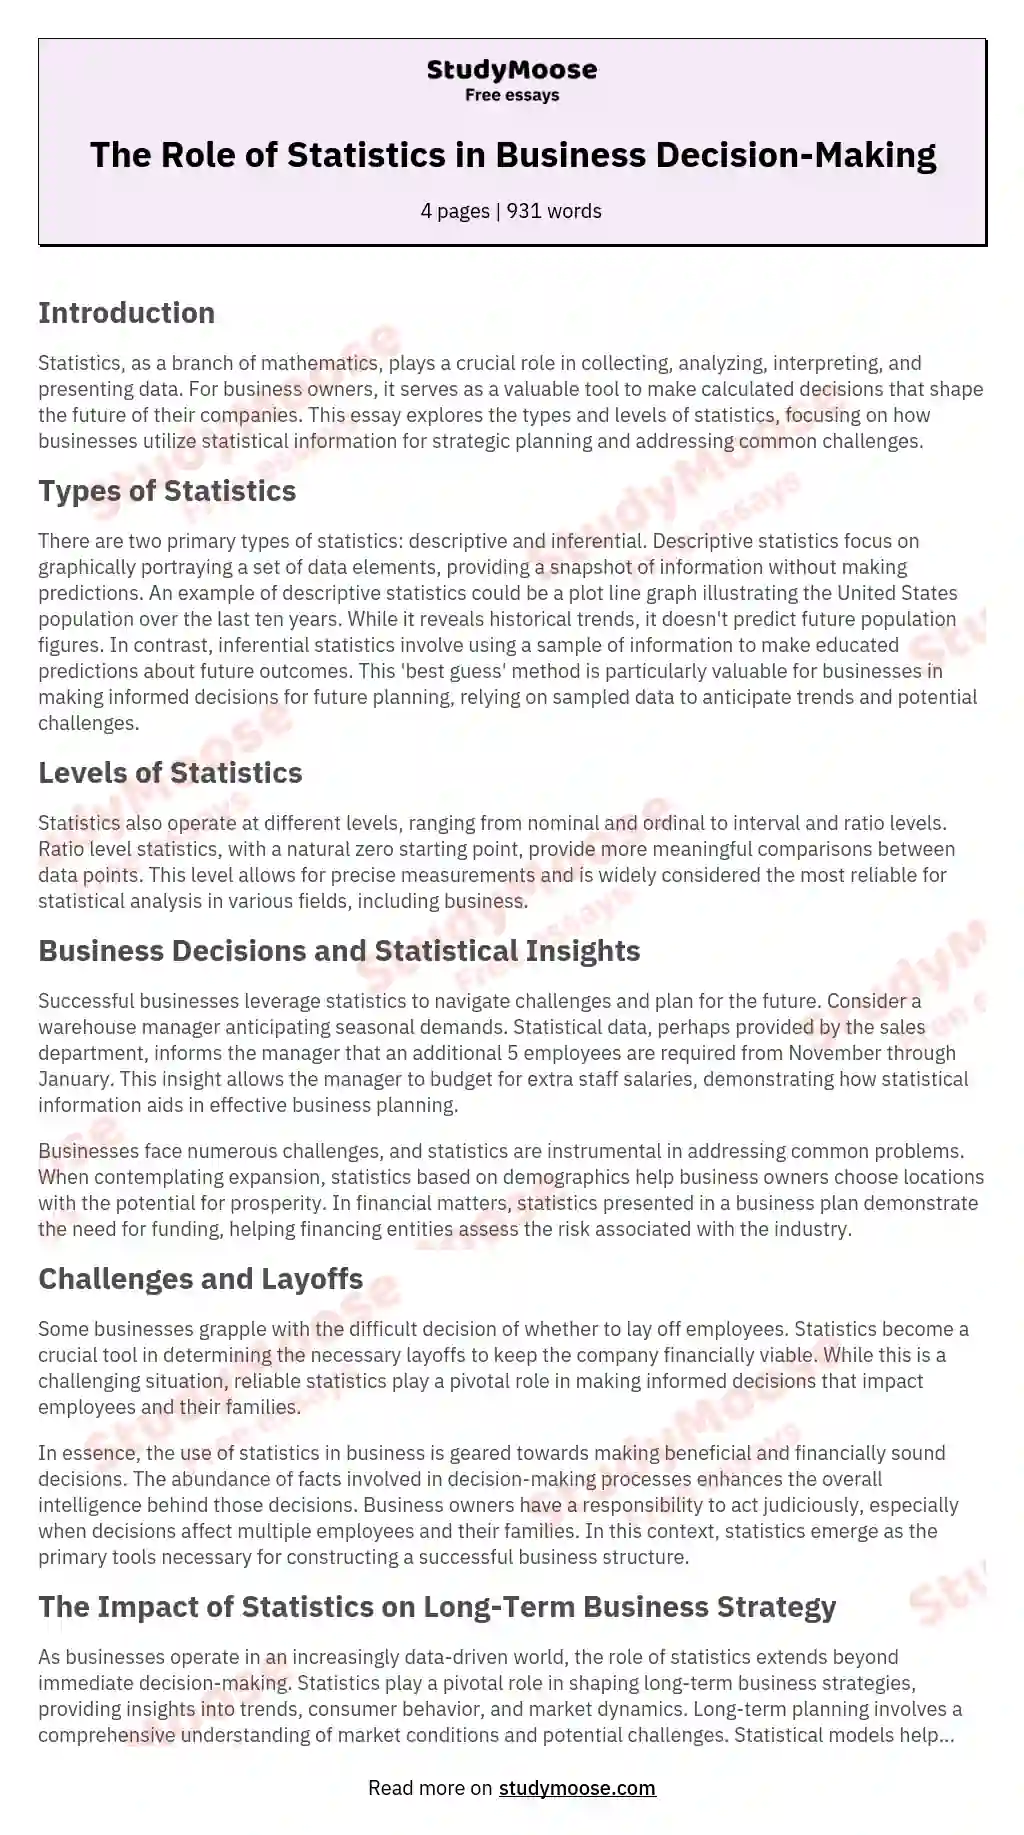 The Role of Statistics in Business Decision-Making essay